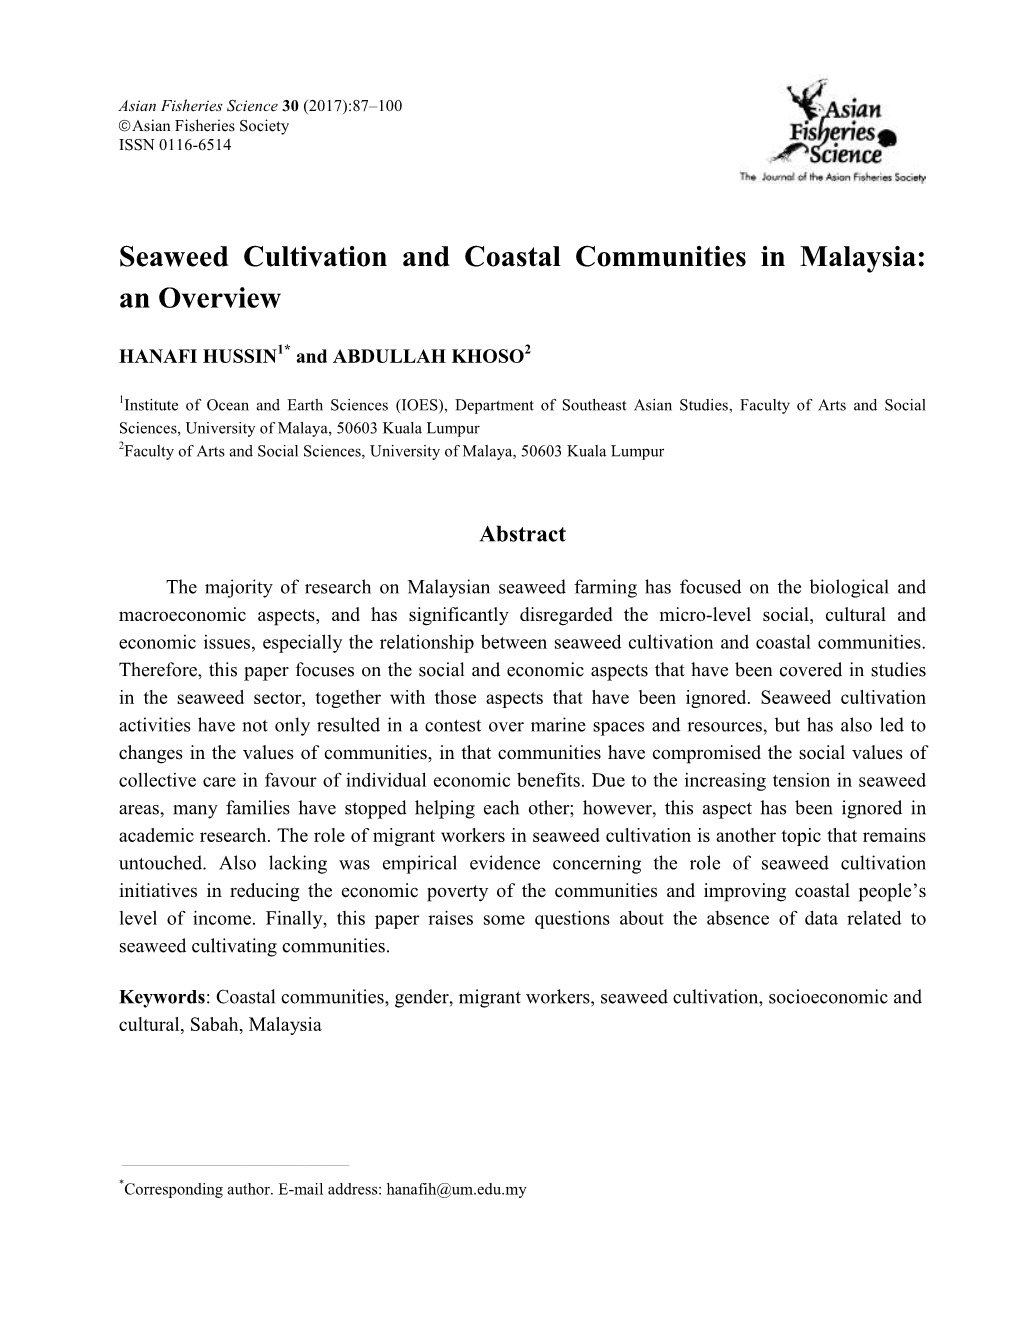 Seaweed Cultivation and Coastal Communities in Malaysia: an Overview